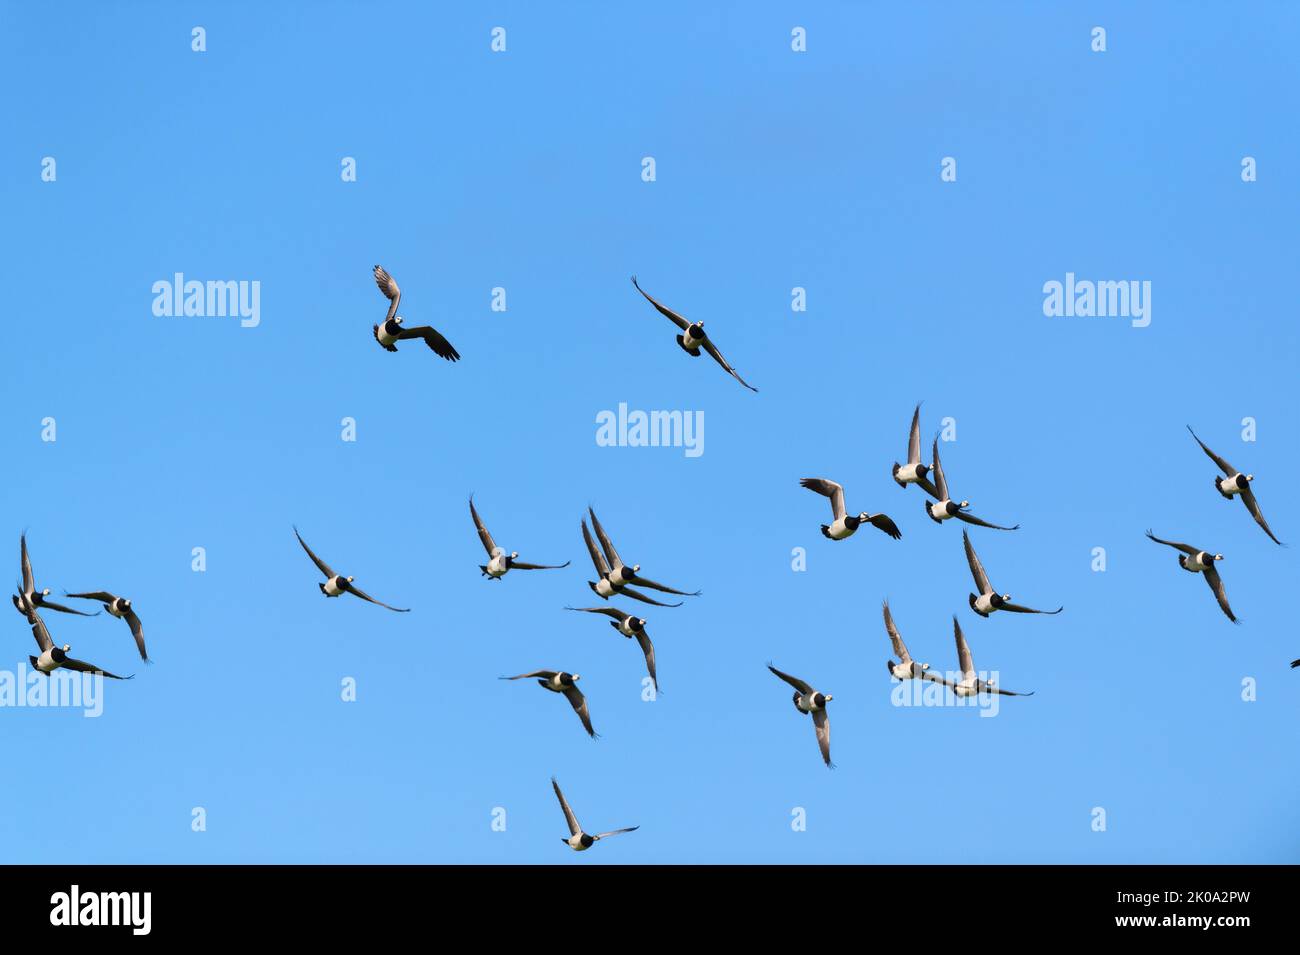 Flying Canadian geese in the blue sky Stock Photo